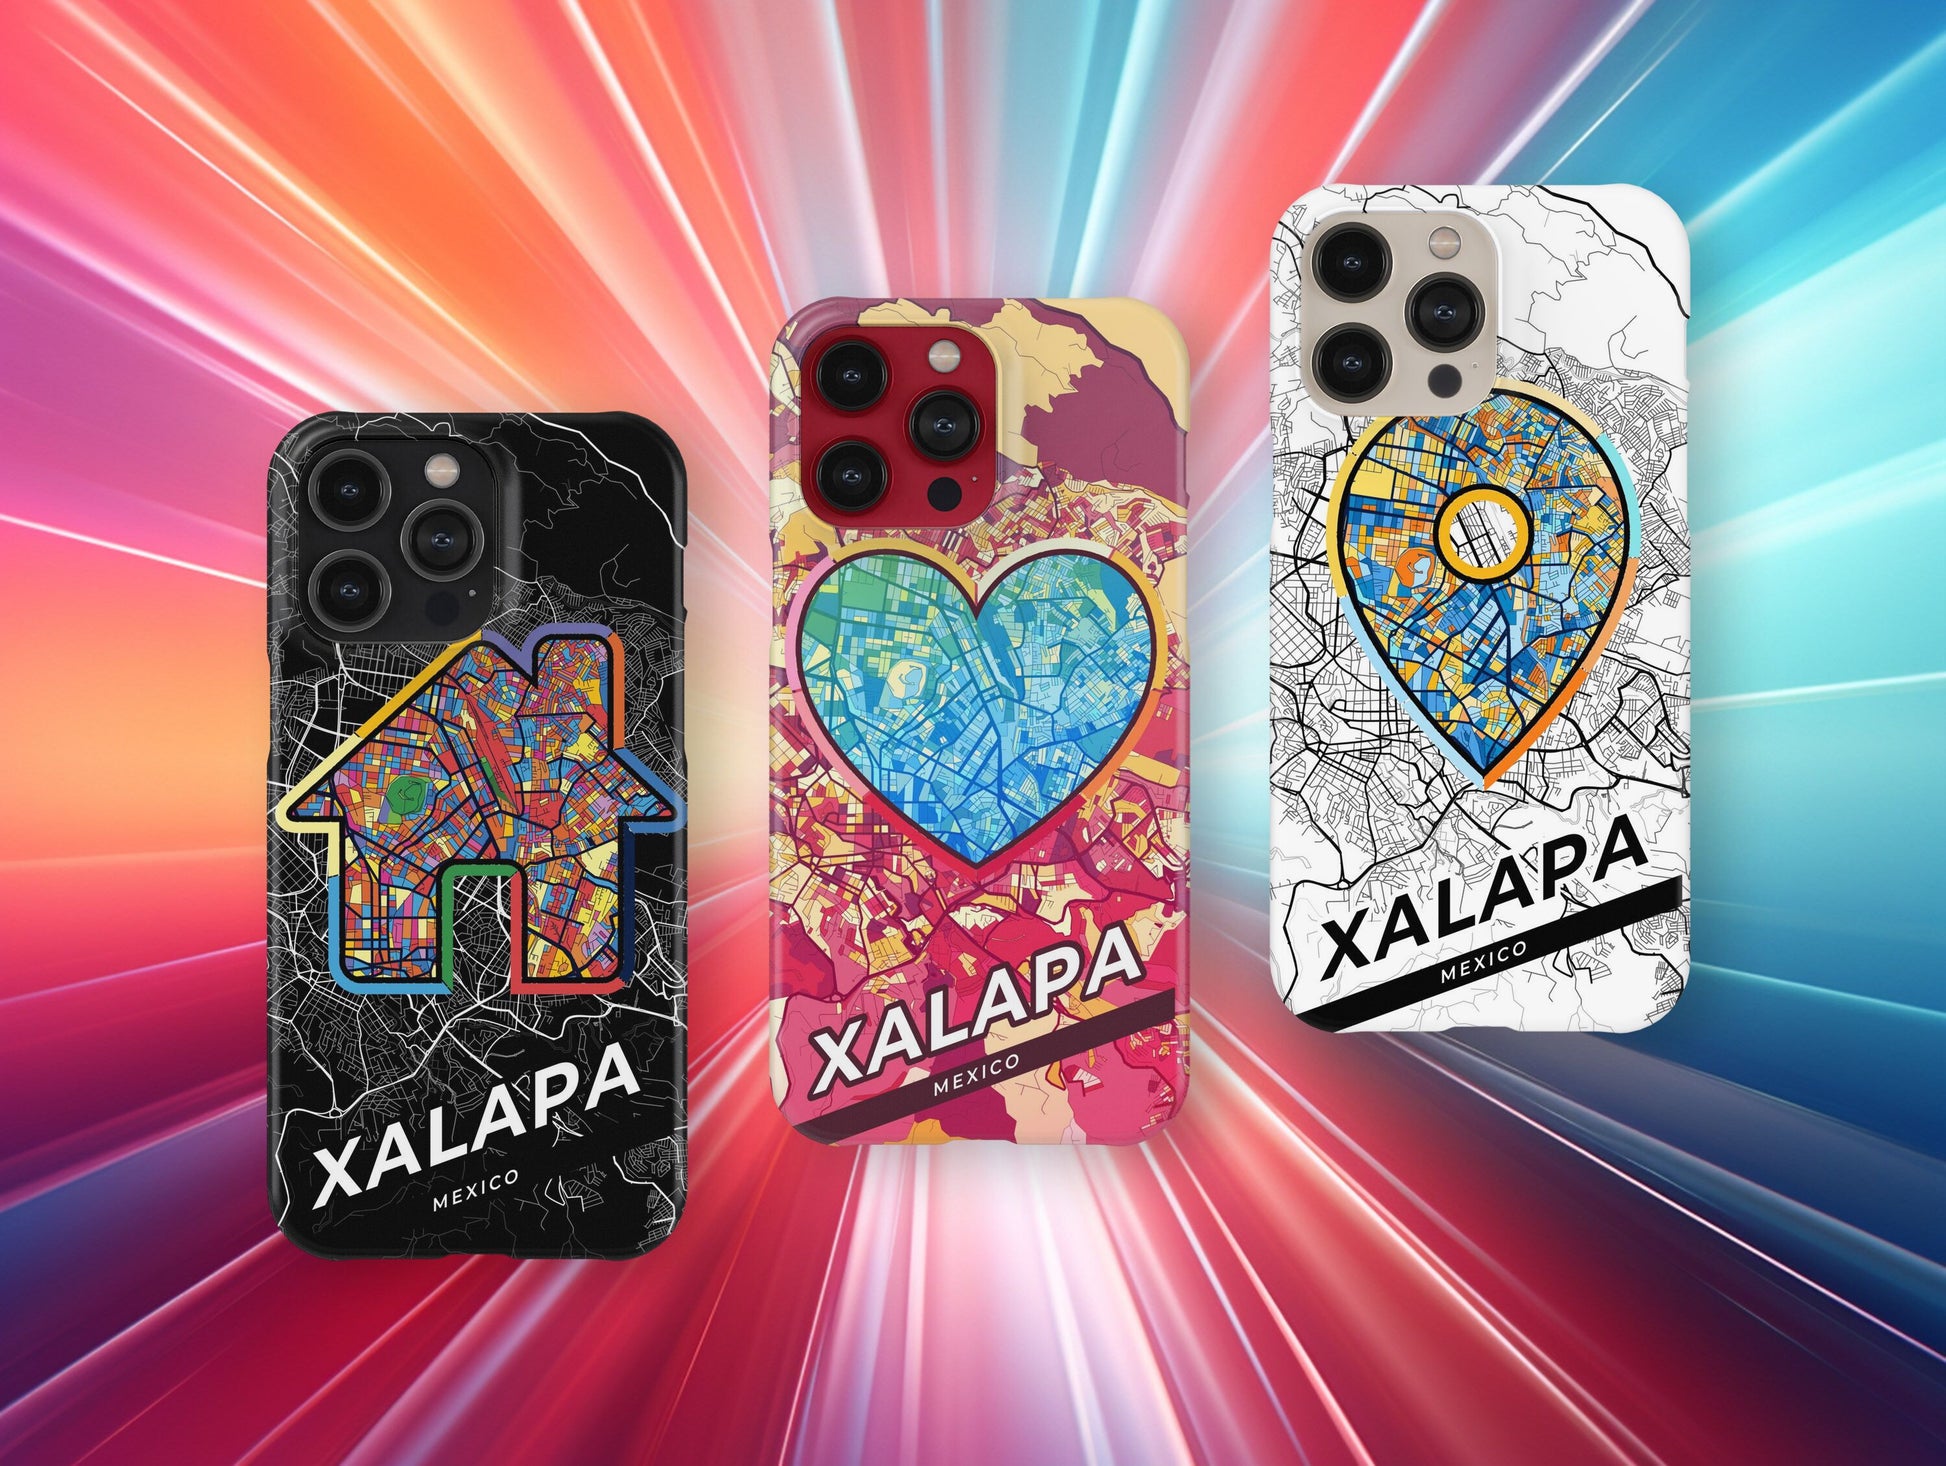 Xalapa Mexico slim phone case with colorful icon